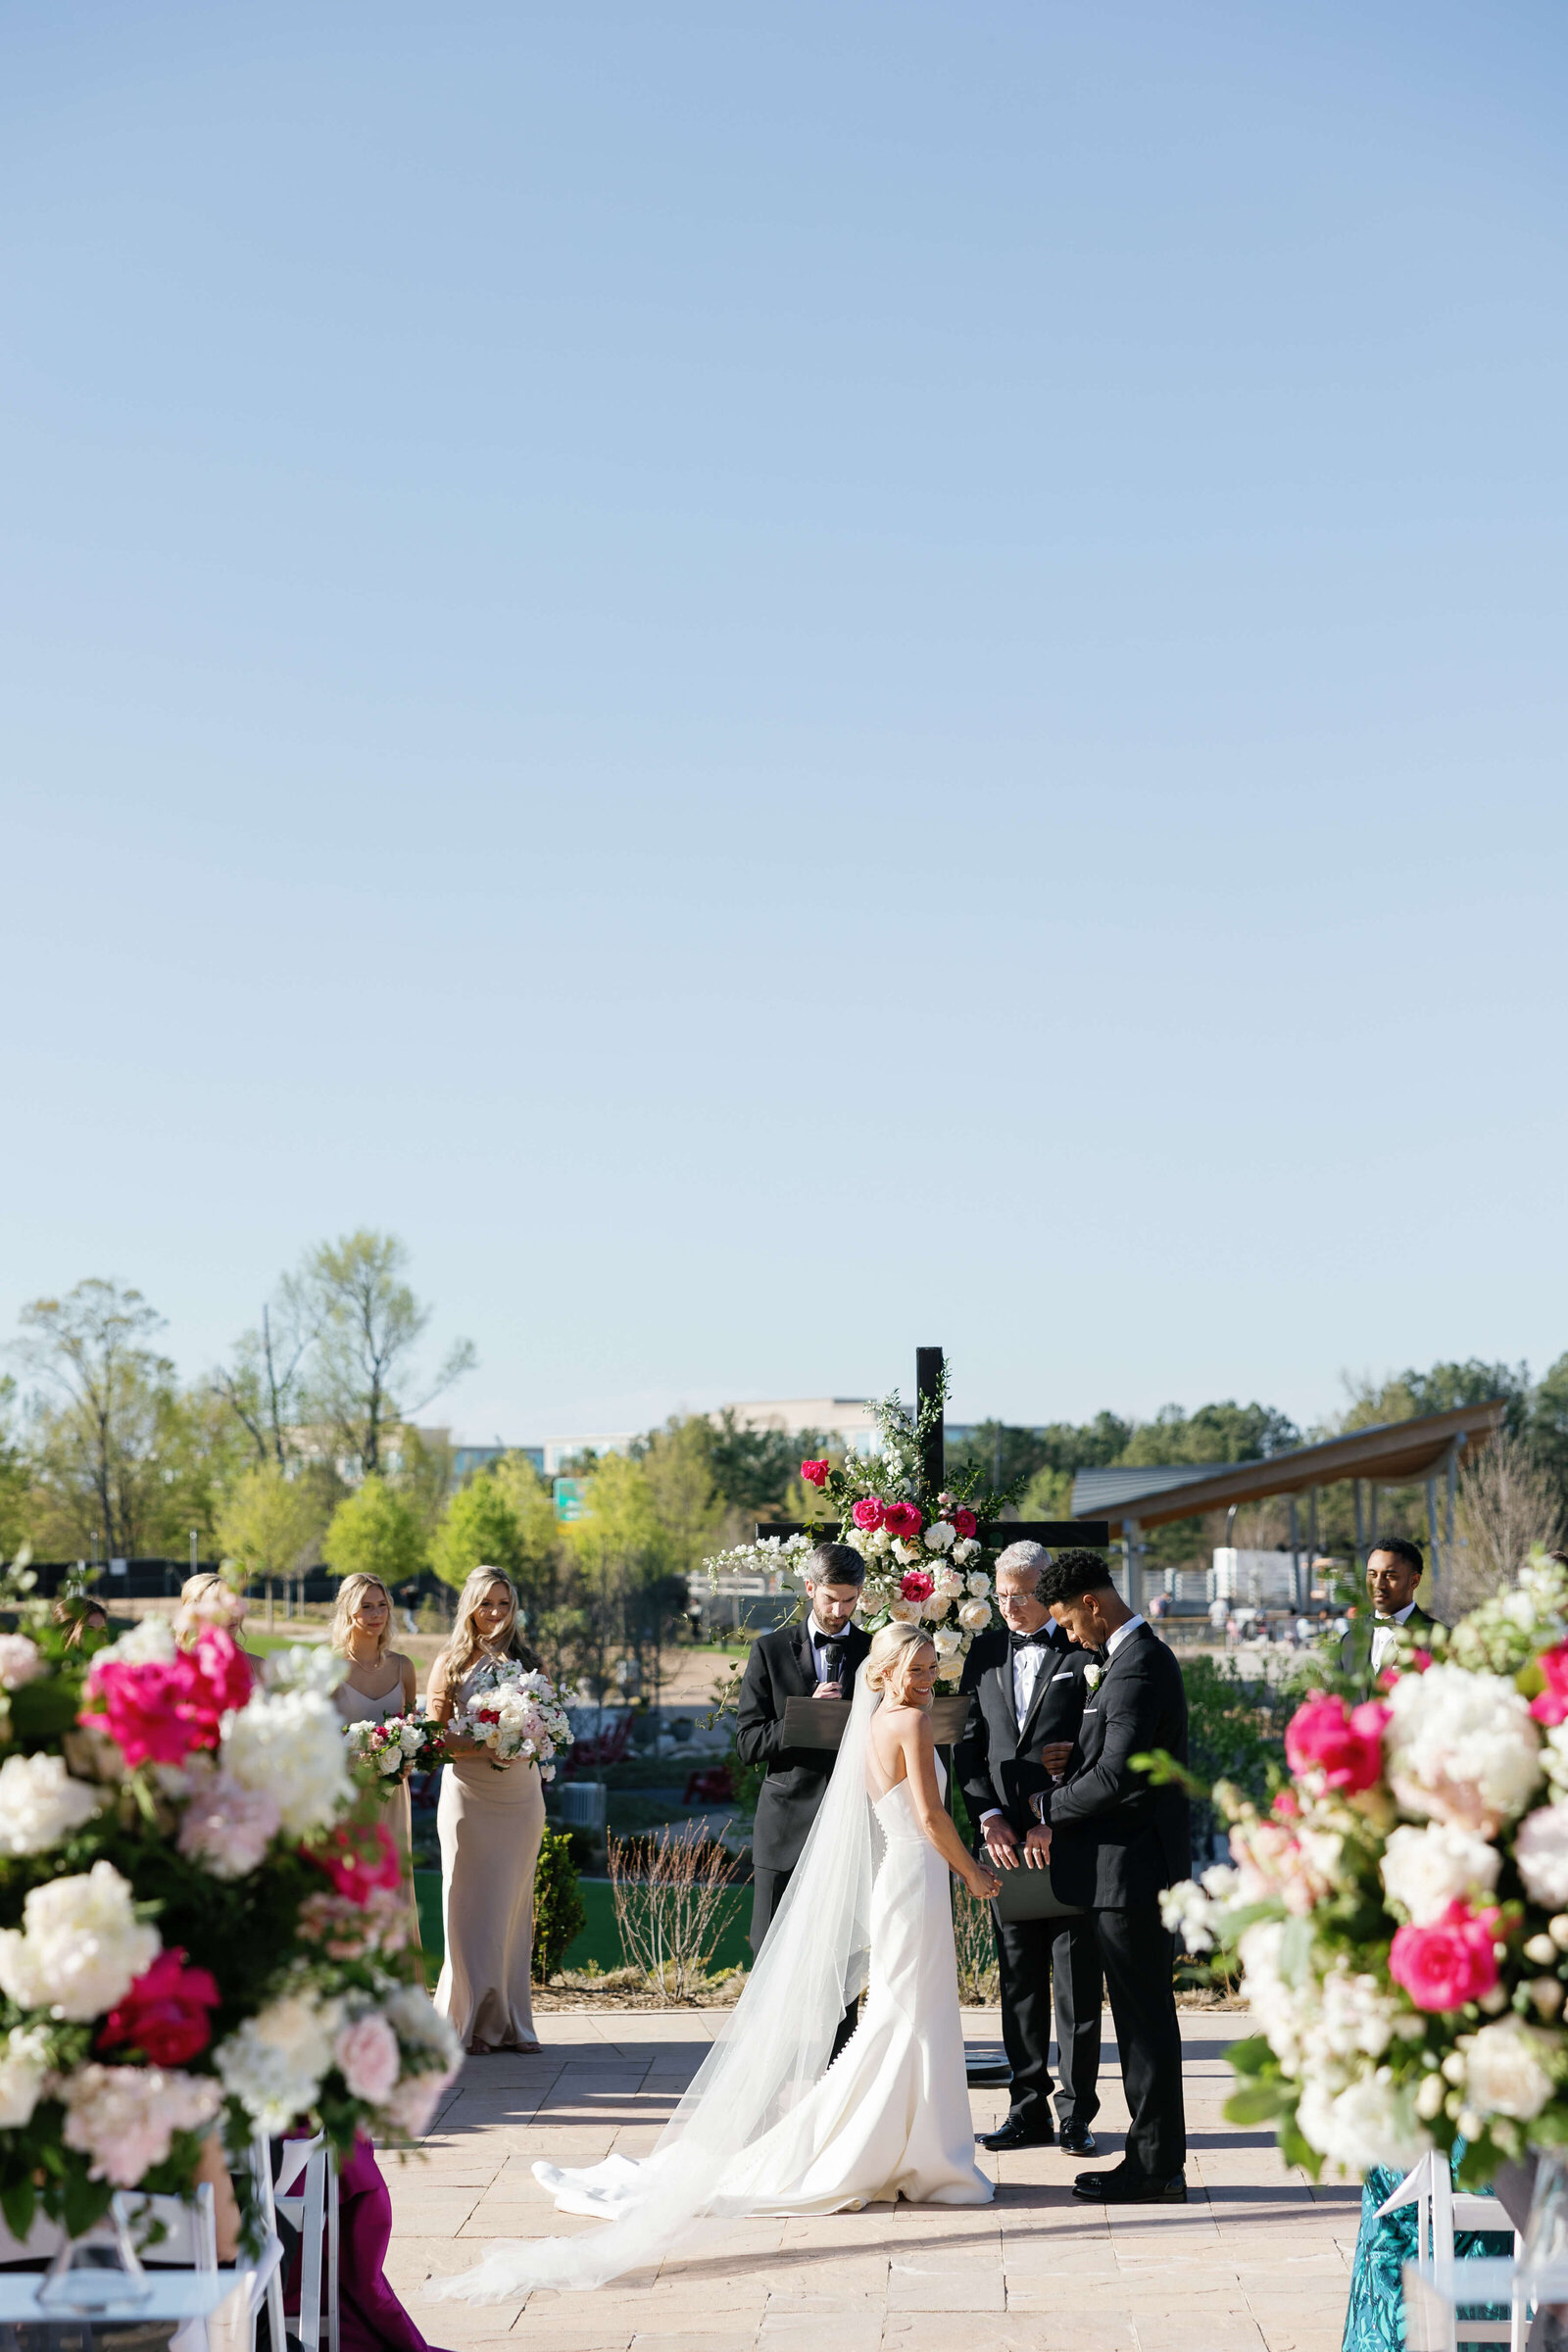 Virginia-Wedding-Planners-Sincerely-Jane-Events-600